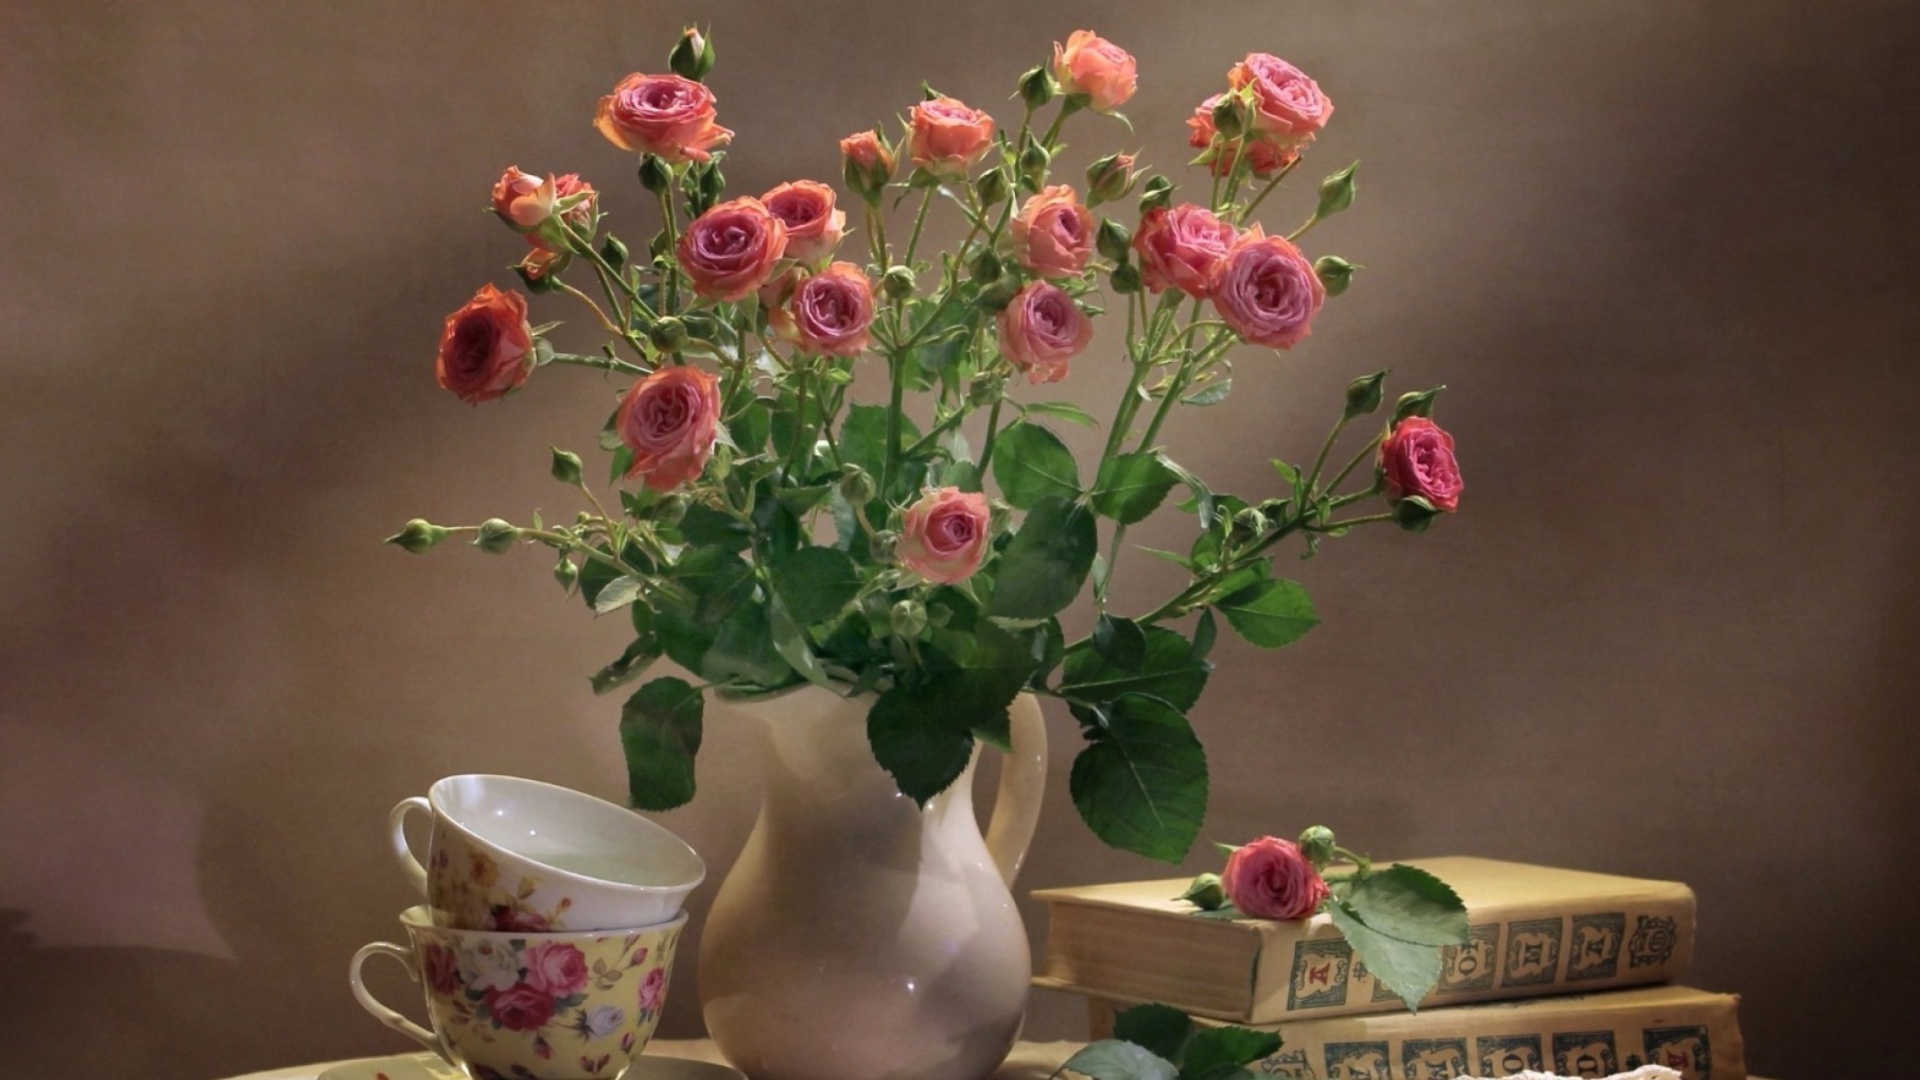 Das Still life of vintage books and roses Wallpaper 1920x1080